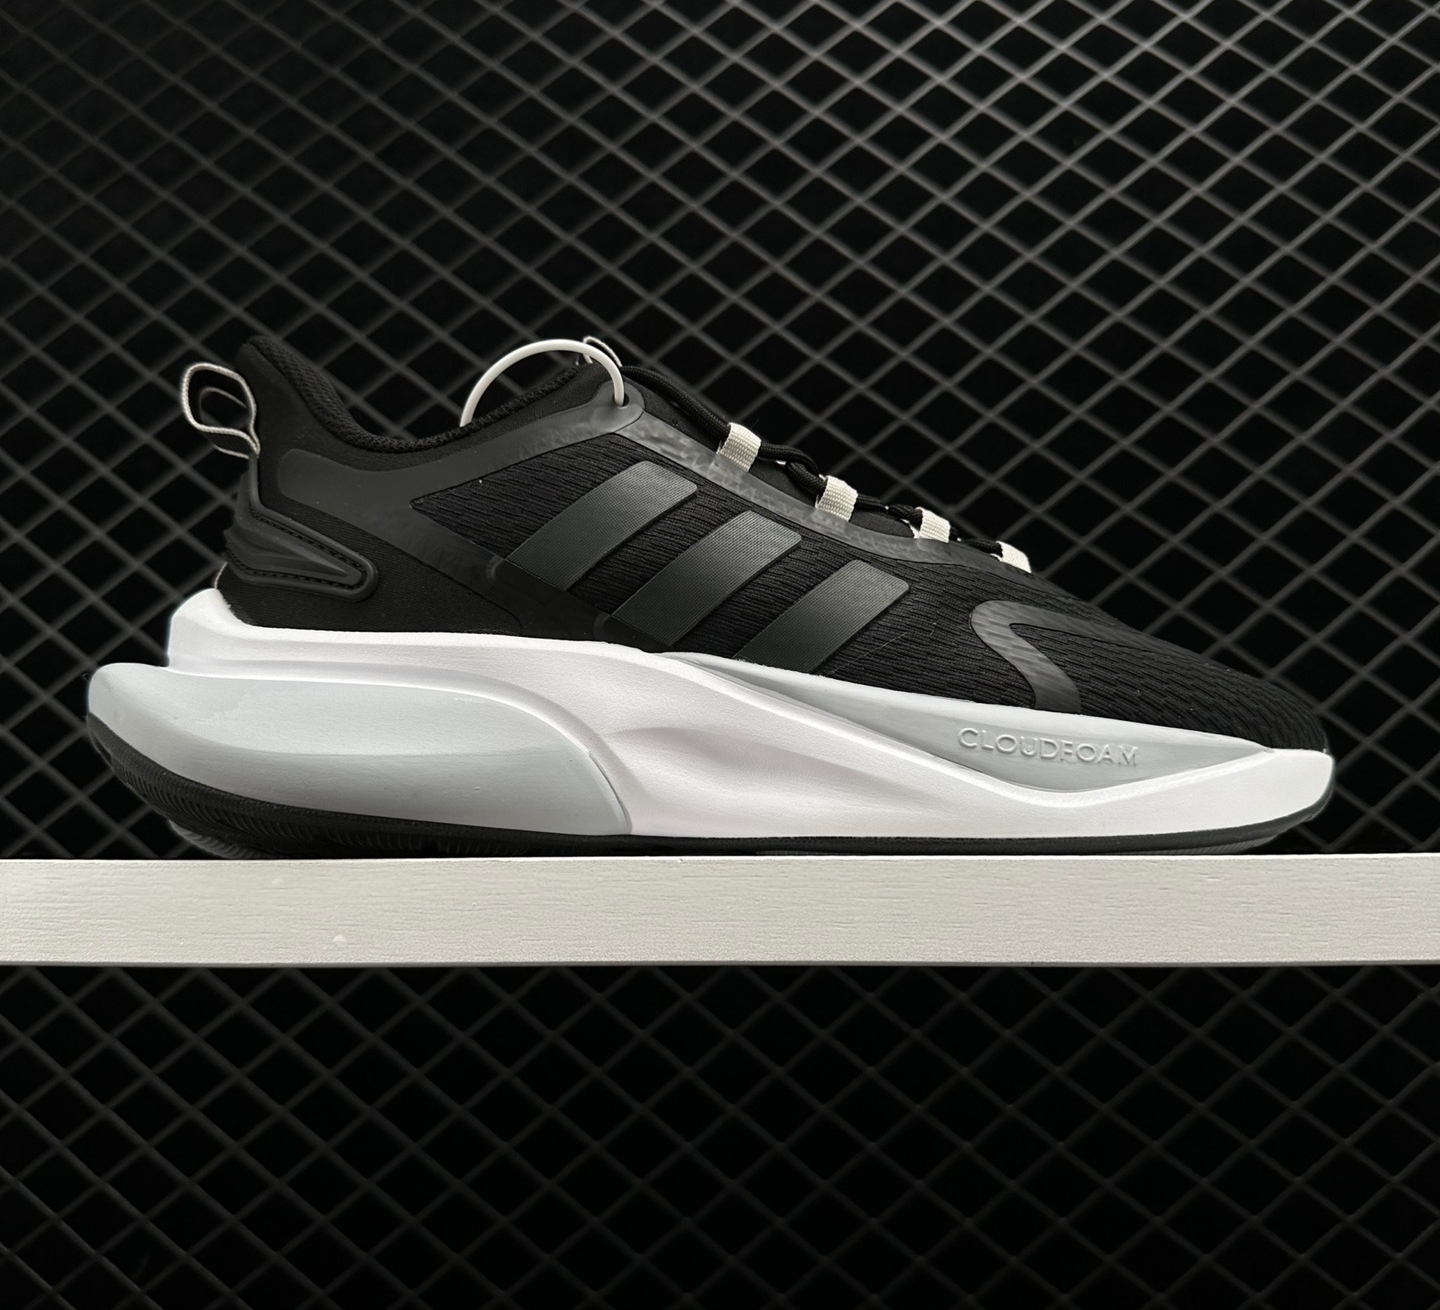 Adidas Alphabounce+ Black White Gray Running Shoes - HP6144